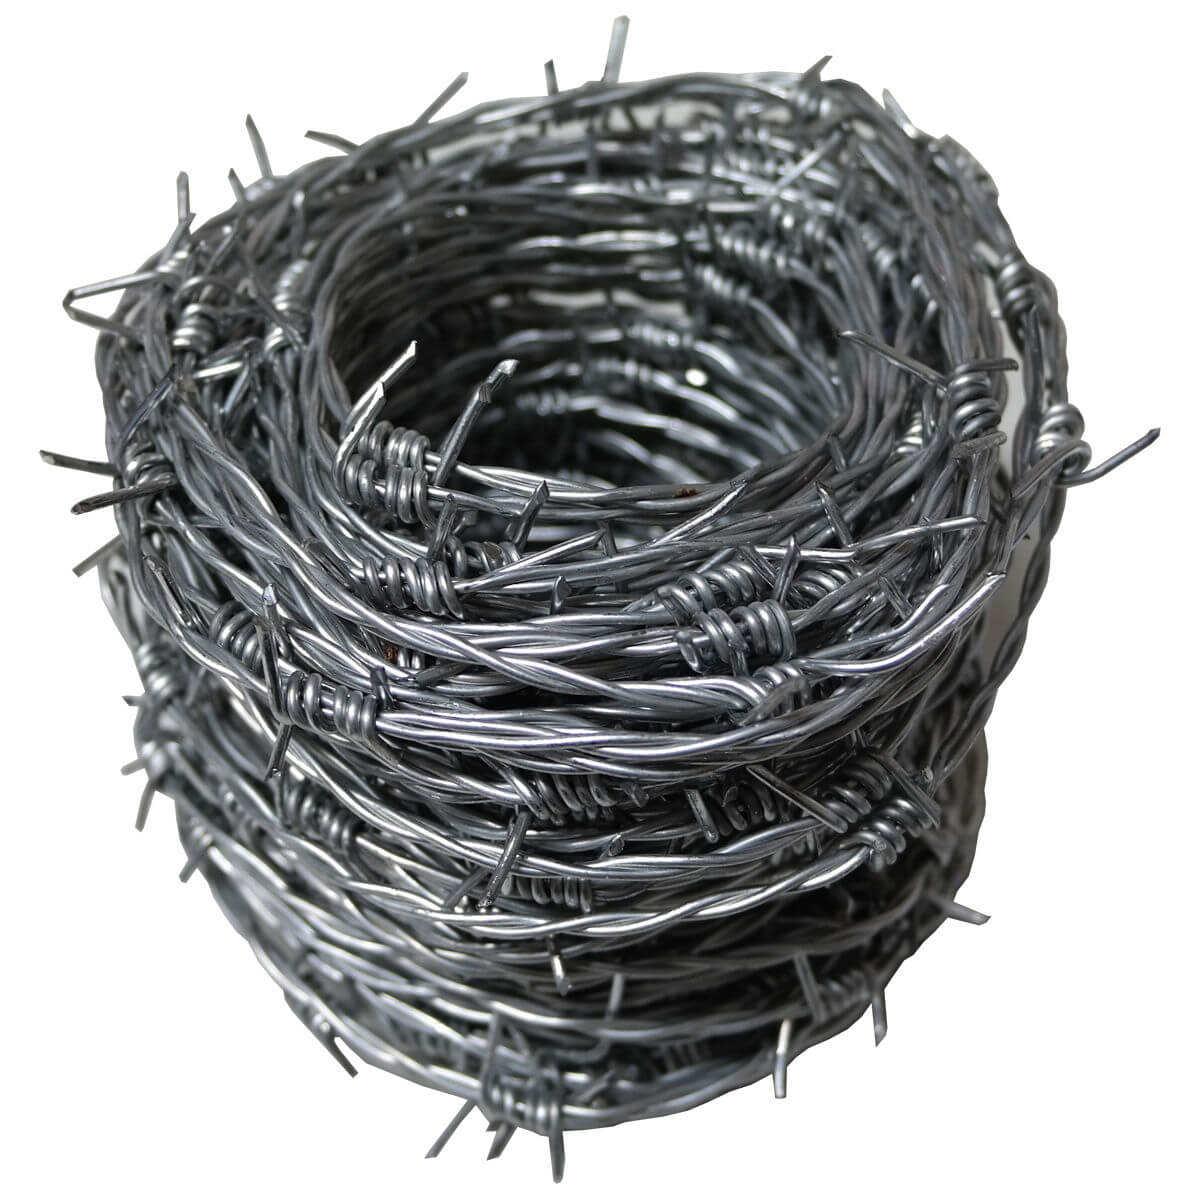 Alternatives to traditional barbed wire fencing